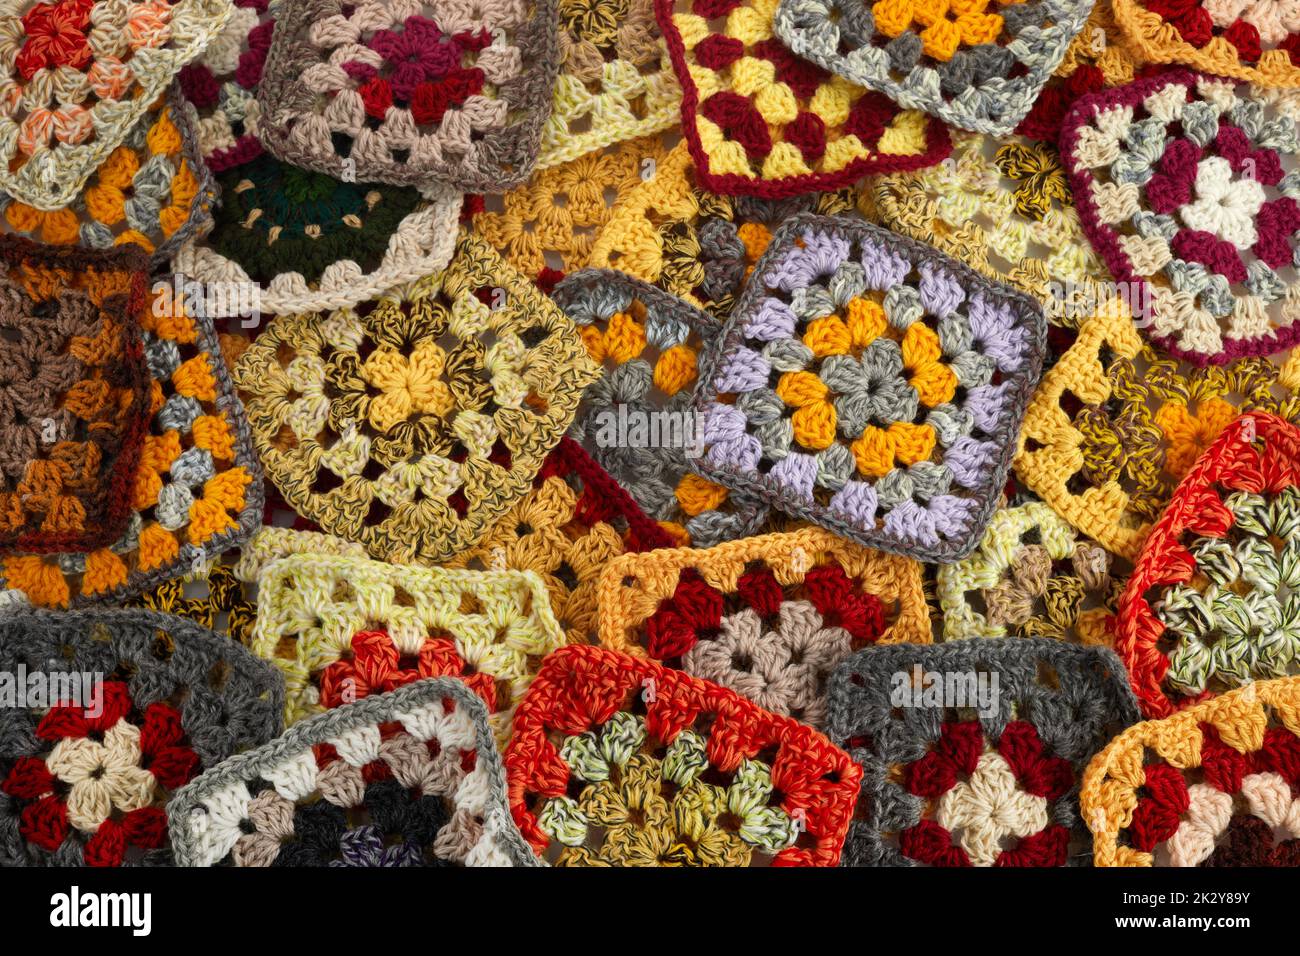 Granny squares. Colored wool knitting crocheting Stock Photo